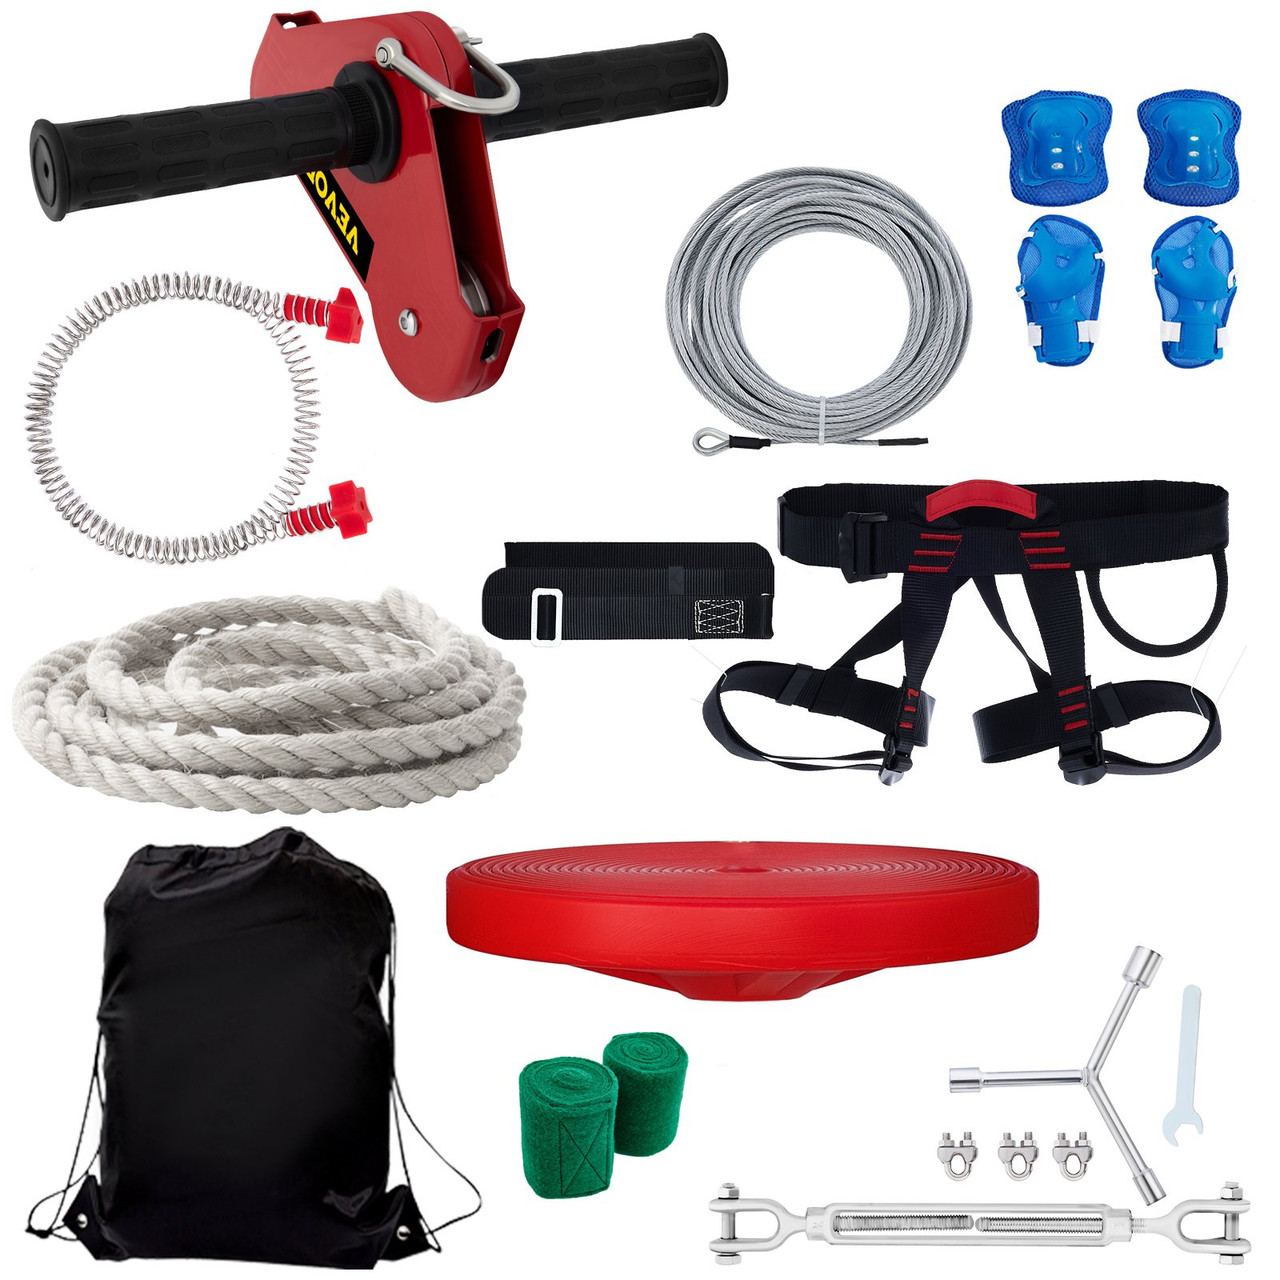 Zip line Kits for Backyard 160FT, Zip Lines for Kid and Adult, Included Swing Seat, Zip Lines Brake, and Steel Trolley, Outdoor Playground Equipment